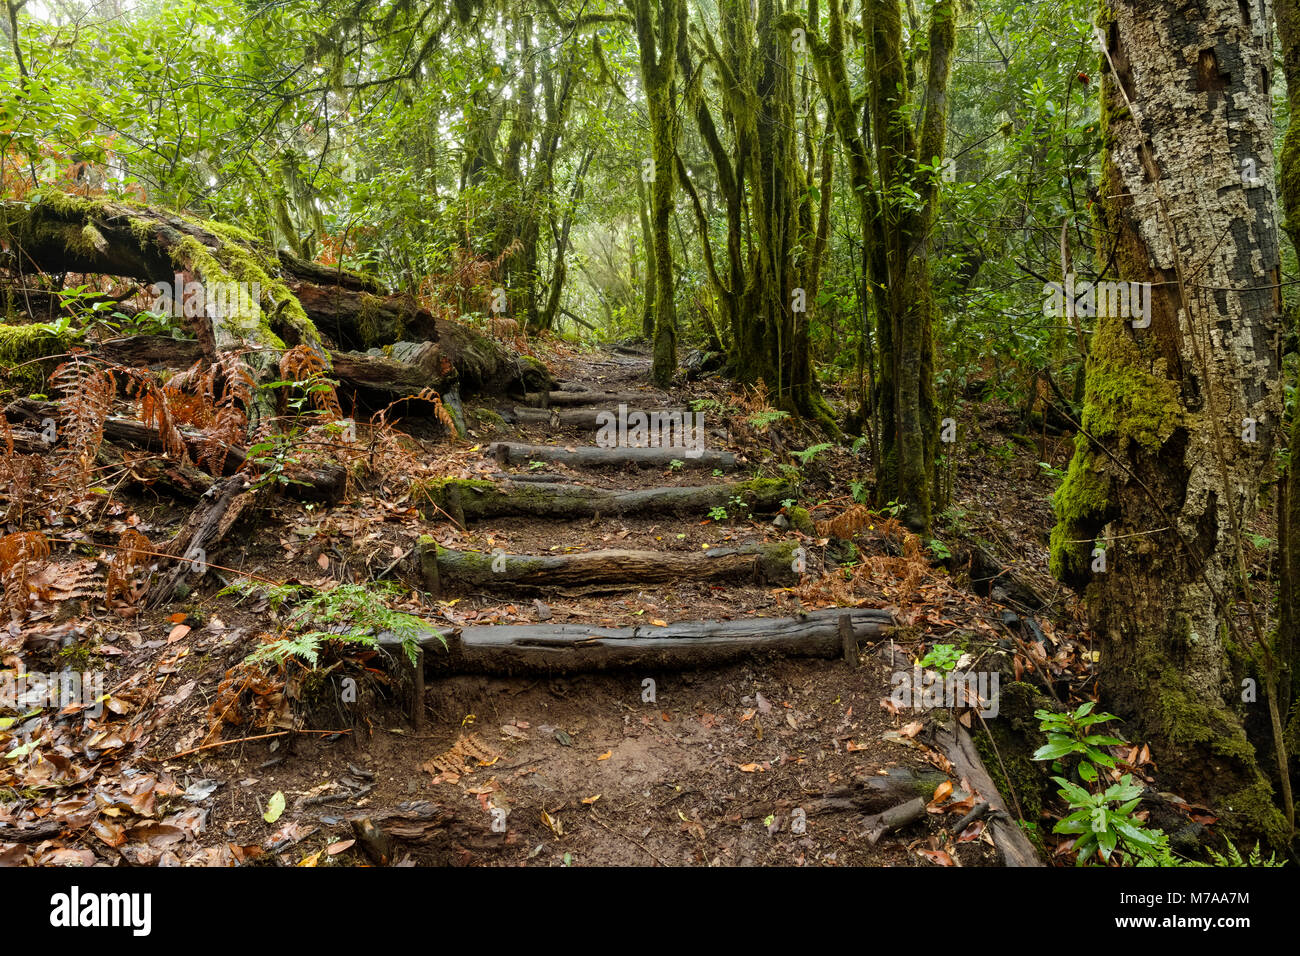 Hiking trail in the cloud forest, Garajonay National Park, La Gomera, Canary Islands, Spain Stock Photo